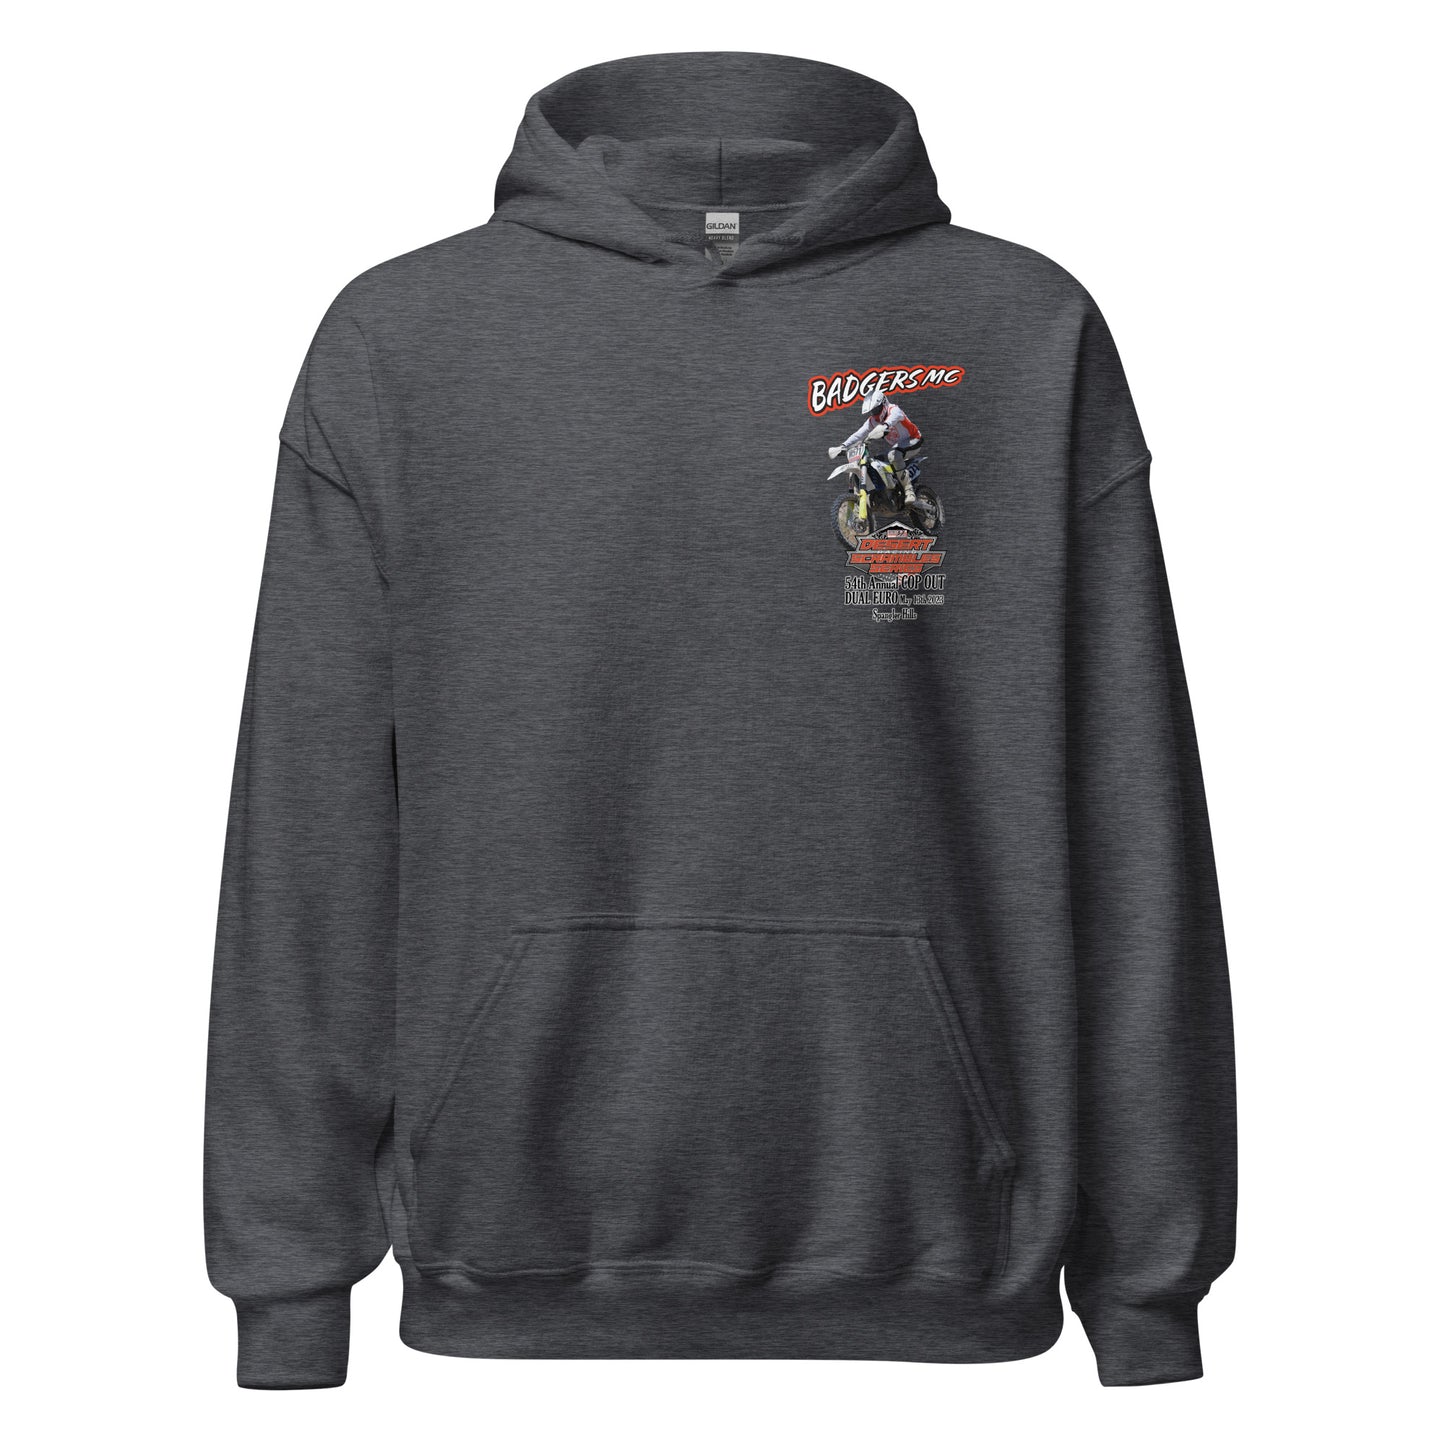 Hoodie - Badgers MC 54th Annual Cop Out Dual Euro Event Shirts - 2023